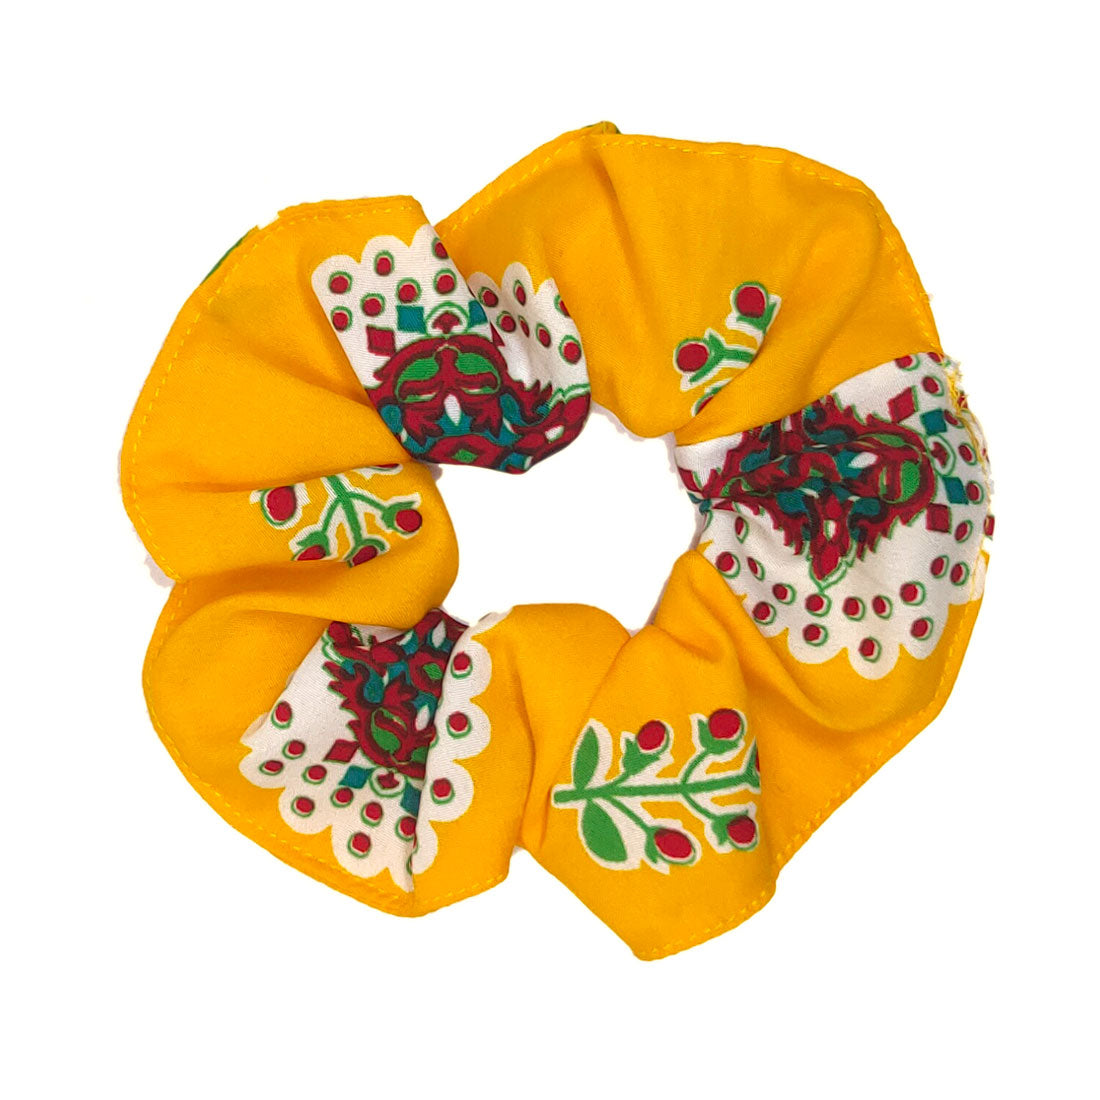 Anokhi Ada Handmade Large Scrunchies/Ponytail Holders for Girls and Women (Set of 4 Scrunchies, Multi-Colour)-05-17H